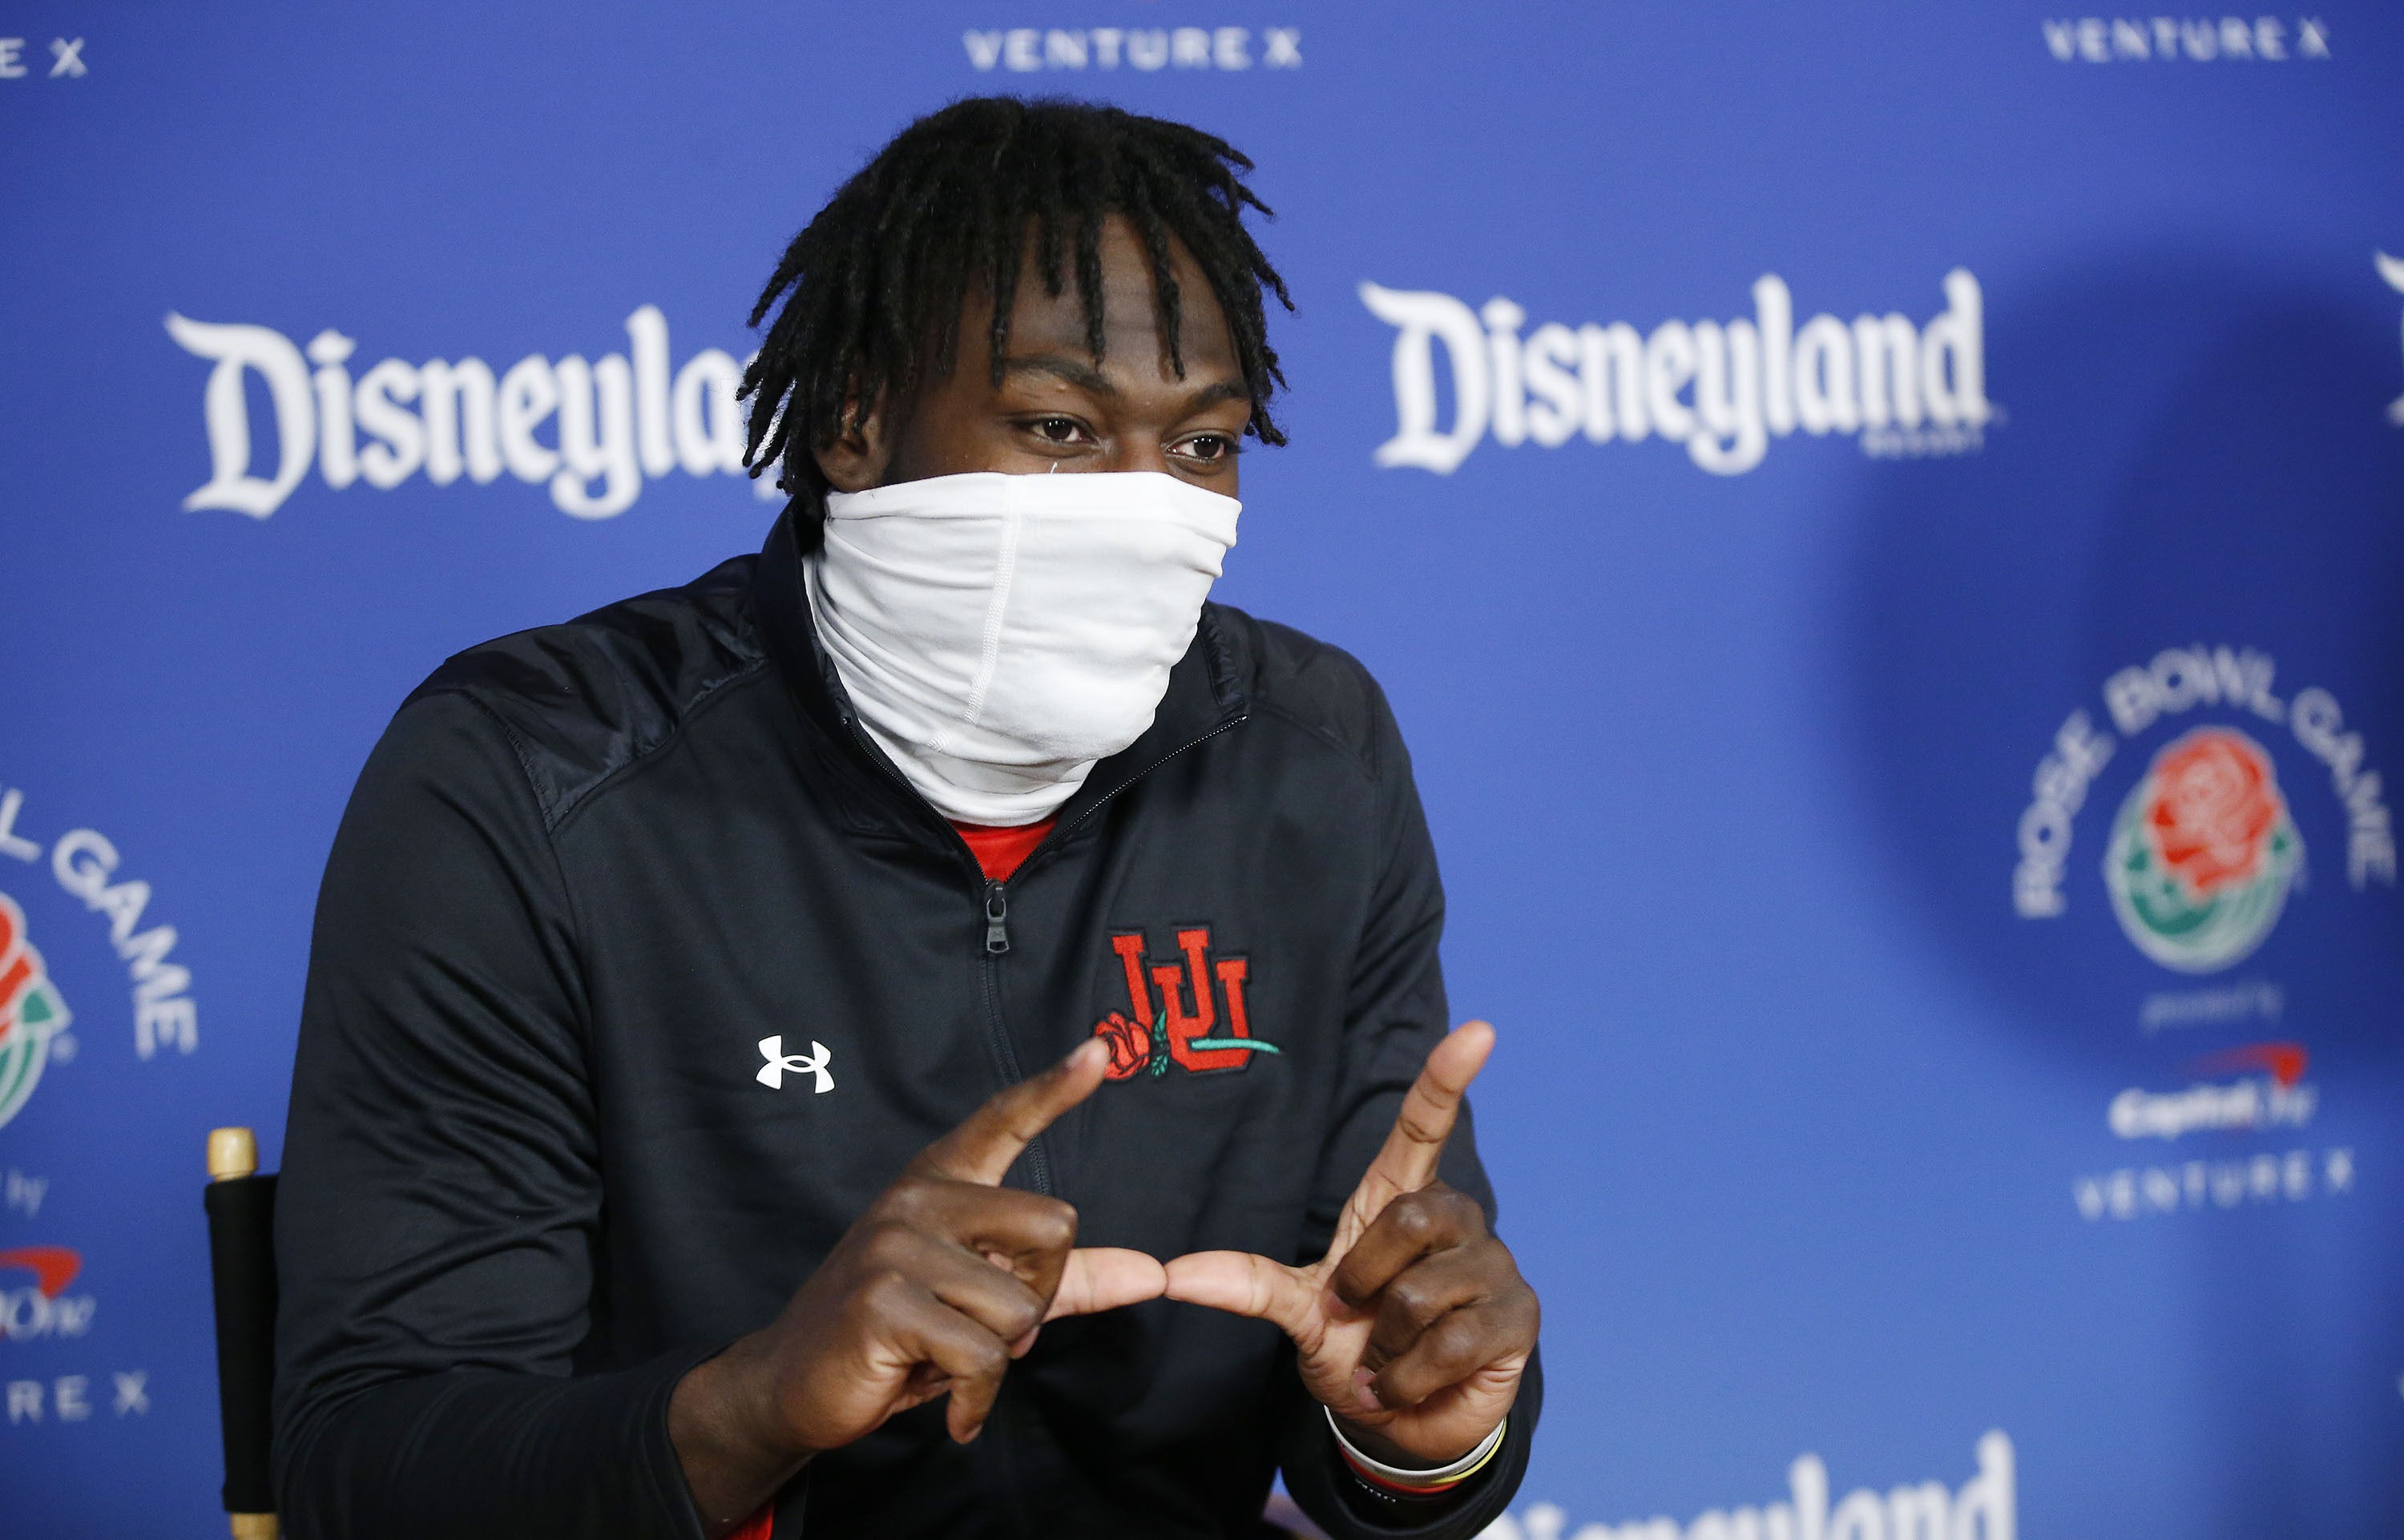 Utah Utes linebacker Devin Lloyd flashes a “U” during a press conference at Disneyland in Anaheim, Calif., on Monday, Dec. 27, 2021, as part of events leading up to the Rose Bowl.